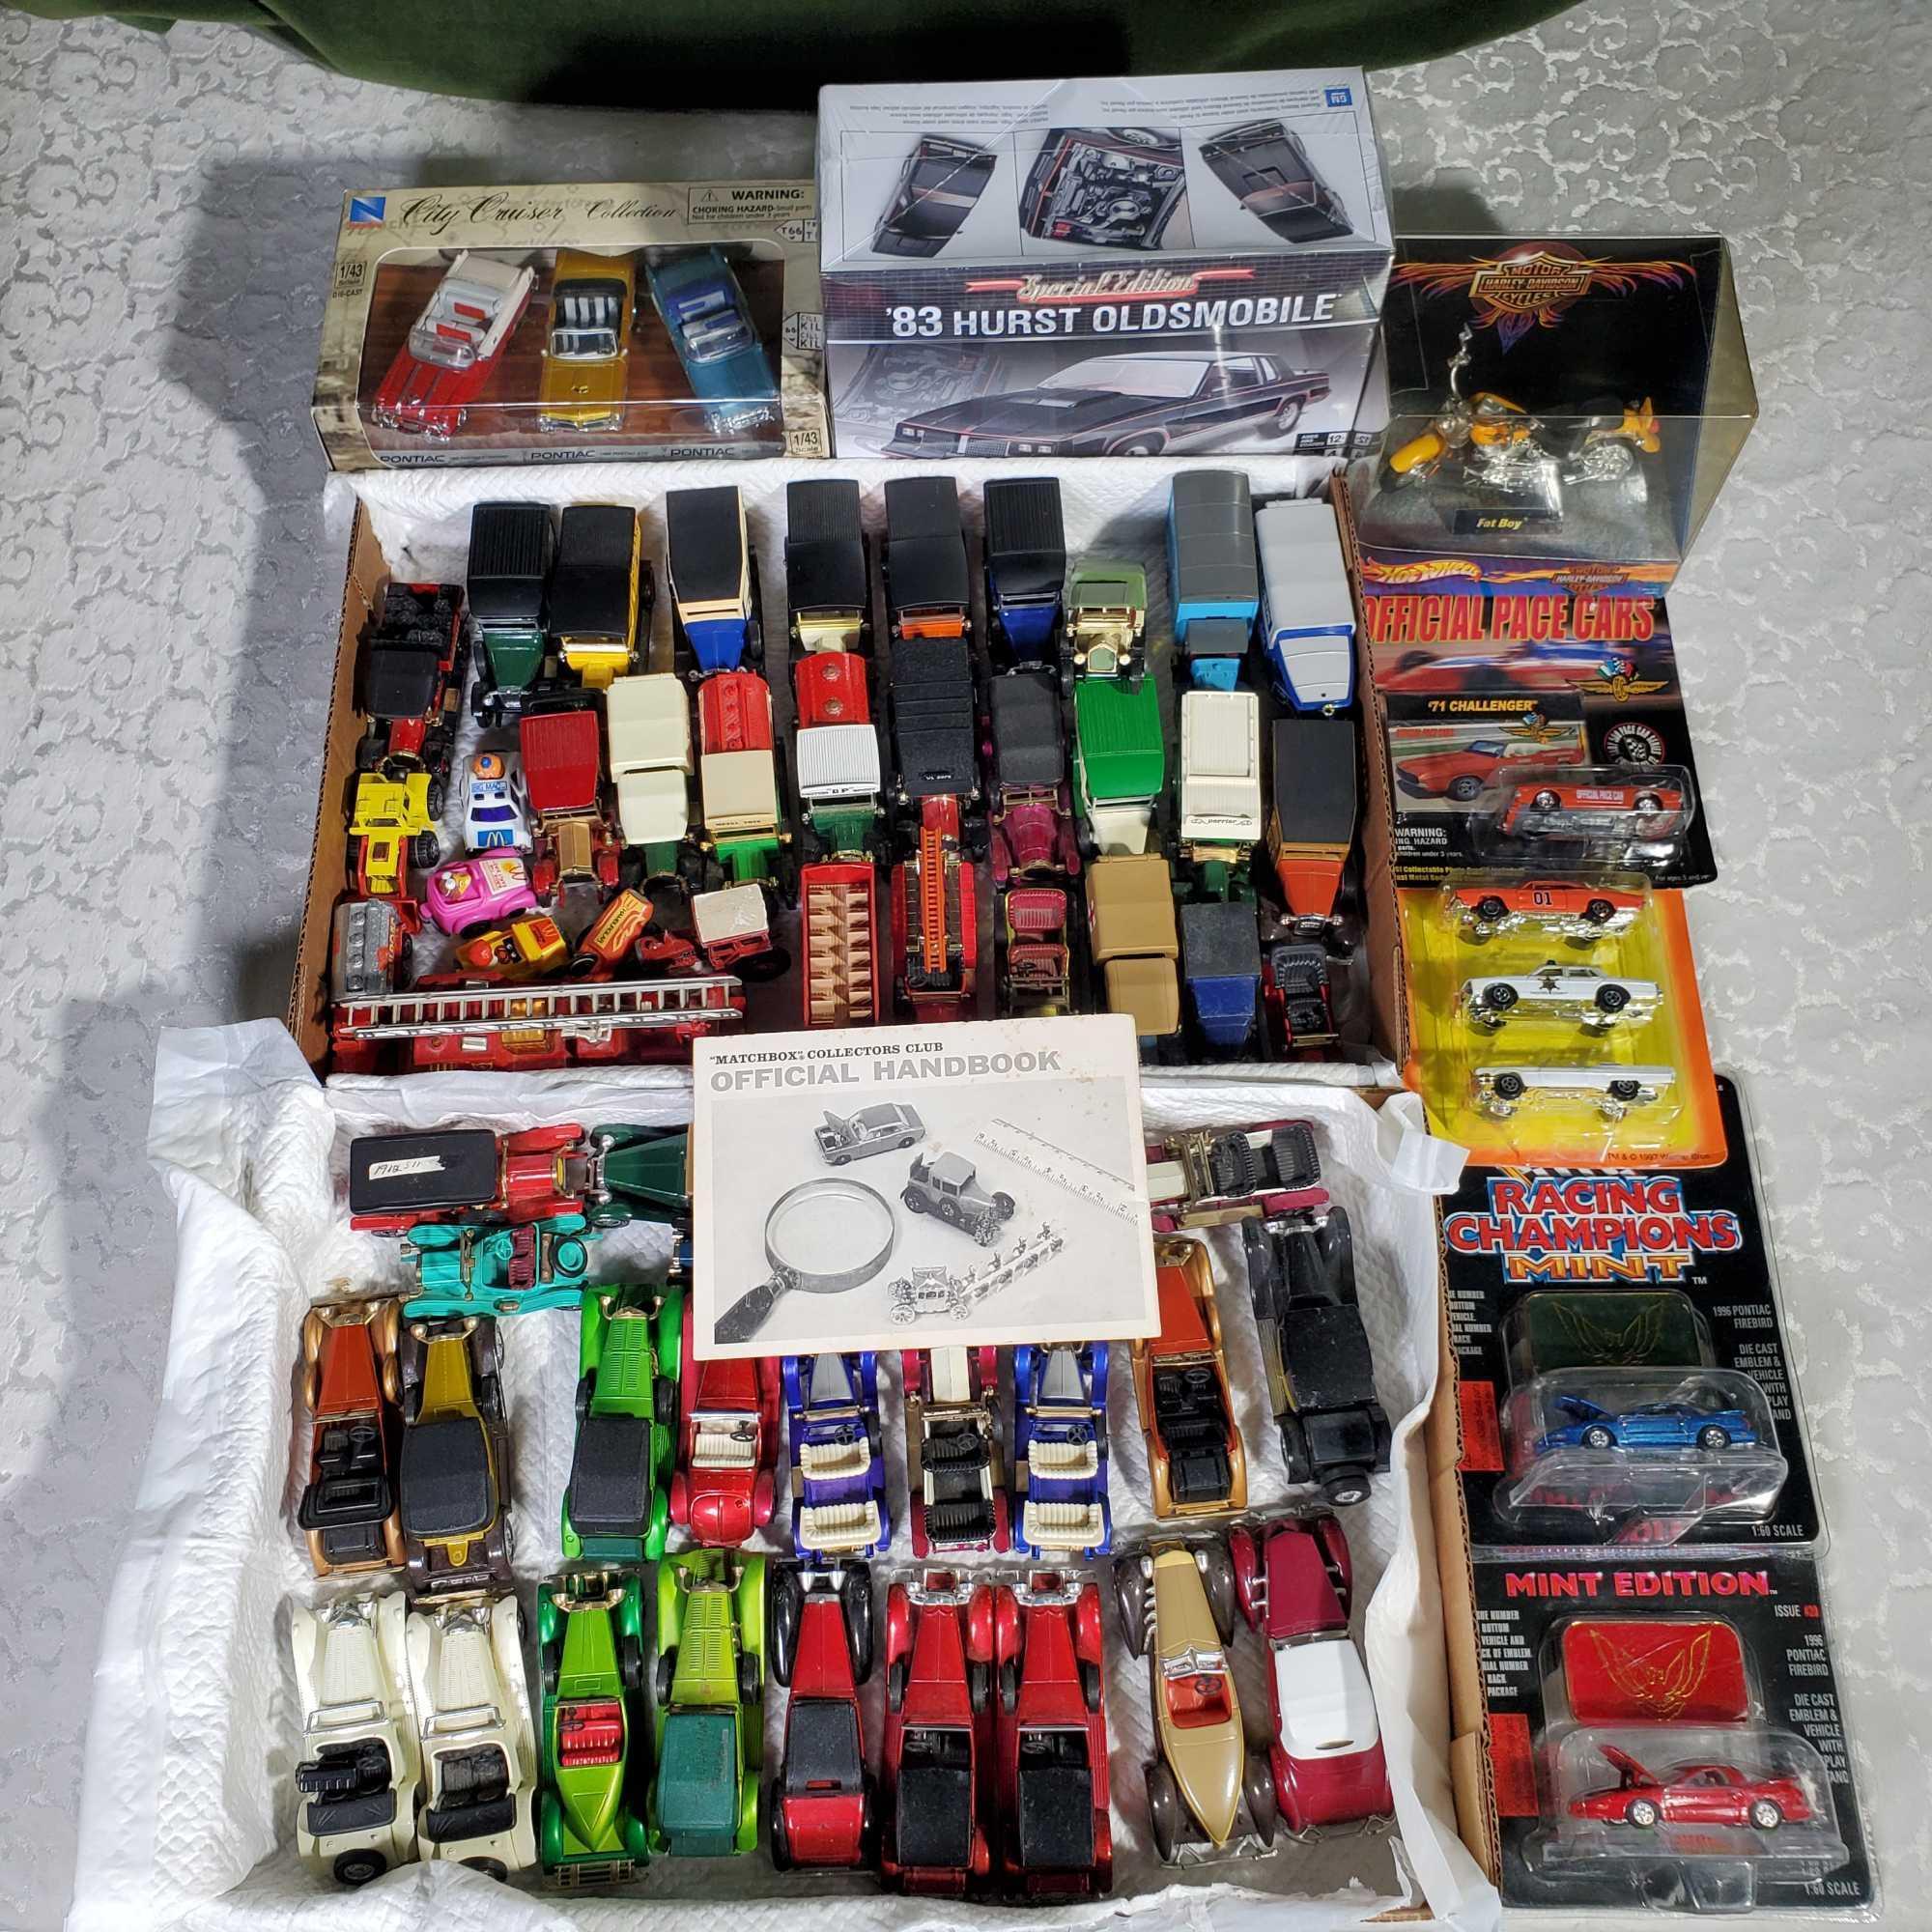 Tray Lots of Matchbox Models of Yesterday and other Die-Cast and Model Cars